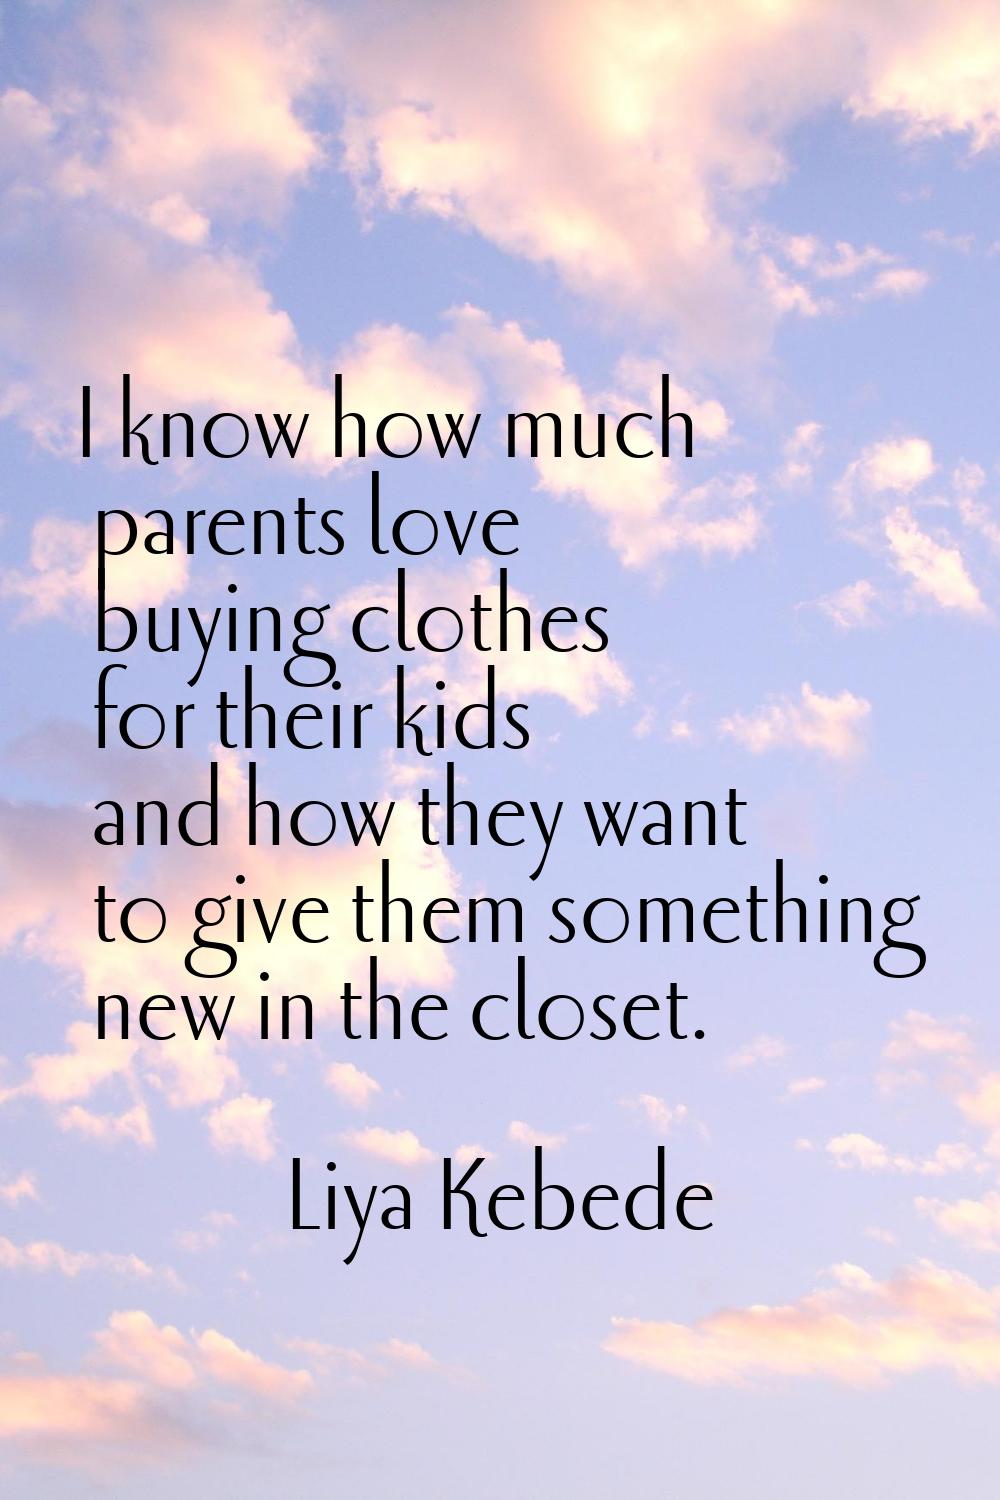 I know how much parents love buying clothes for their kids and how they want to give them something